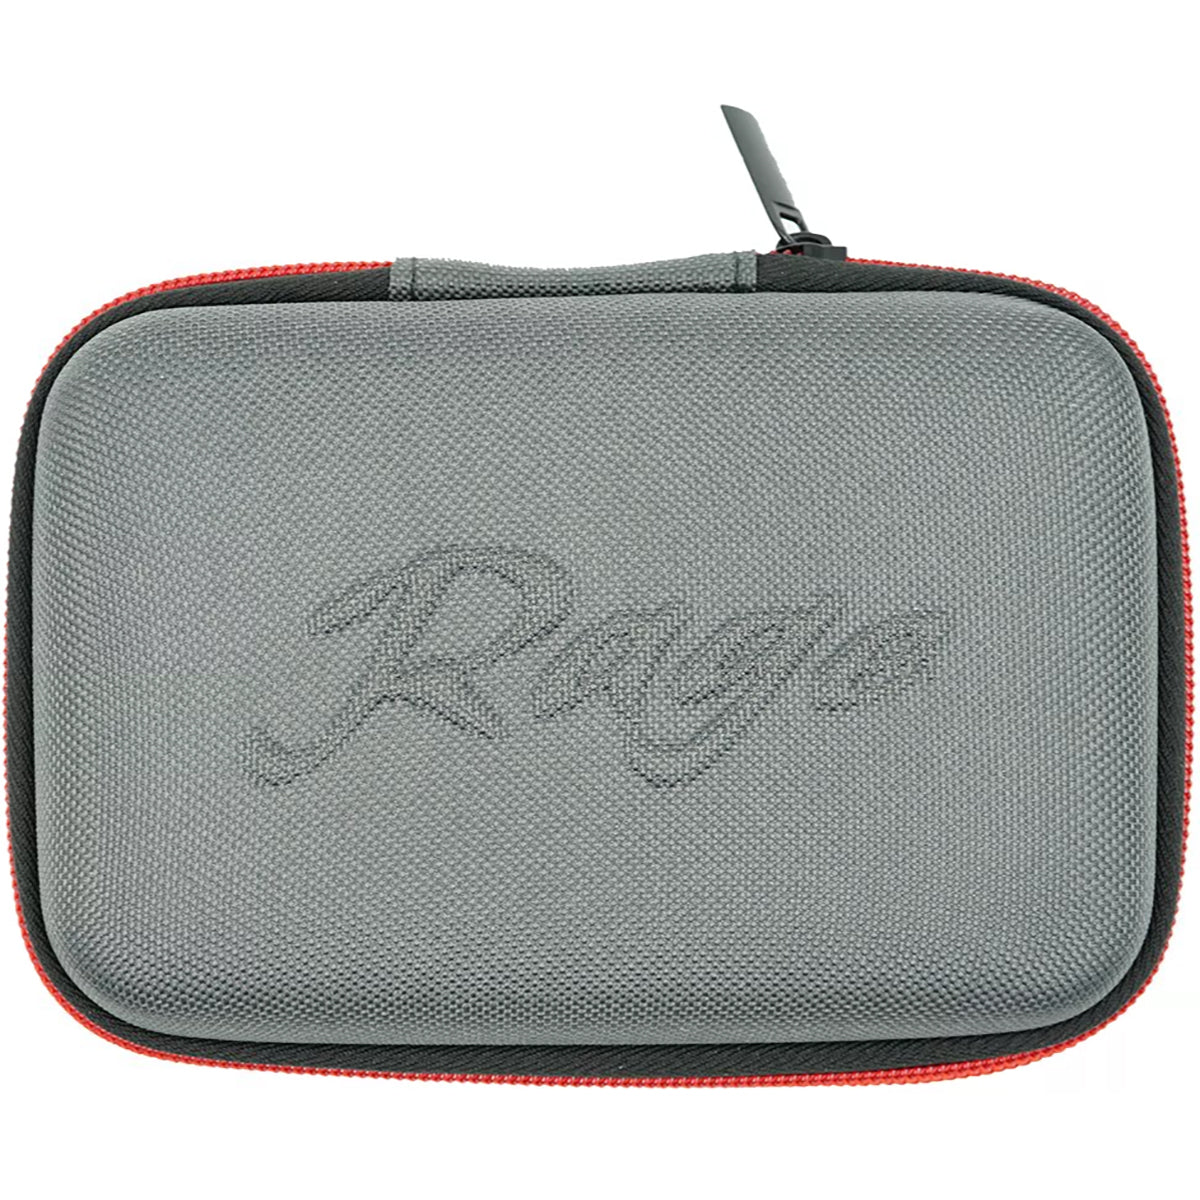 Rage Broadhead and Accessory Carrying Case RAGE